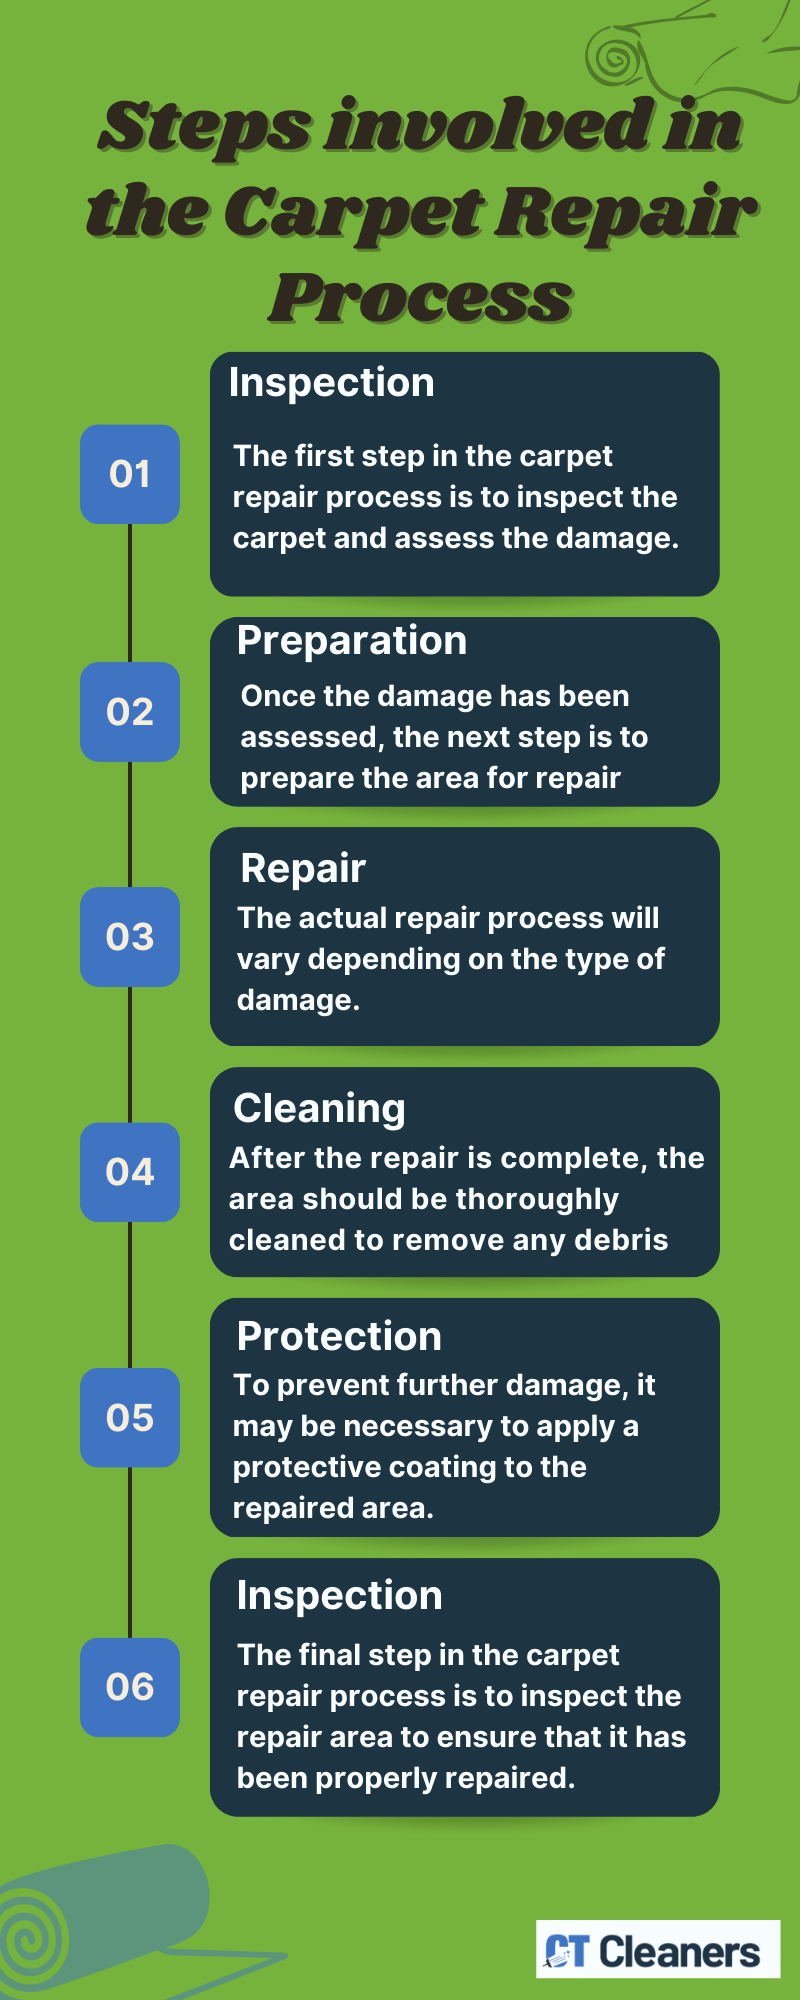 Steps involved in the Carpet Repair Process